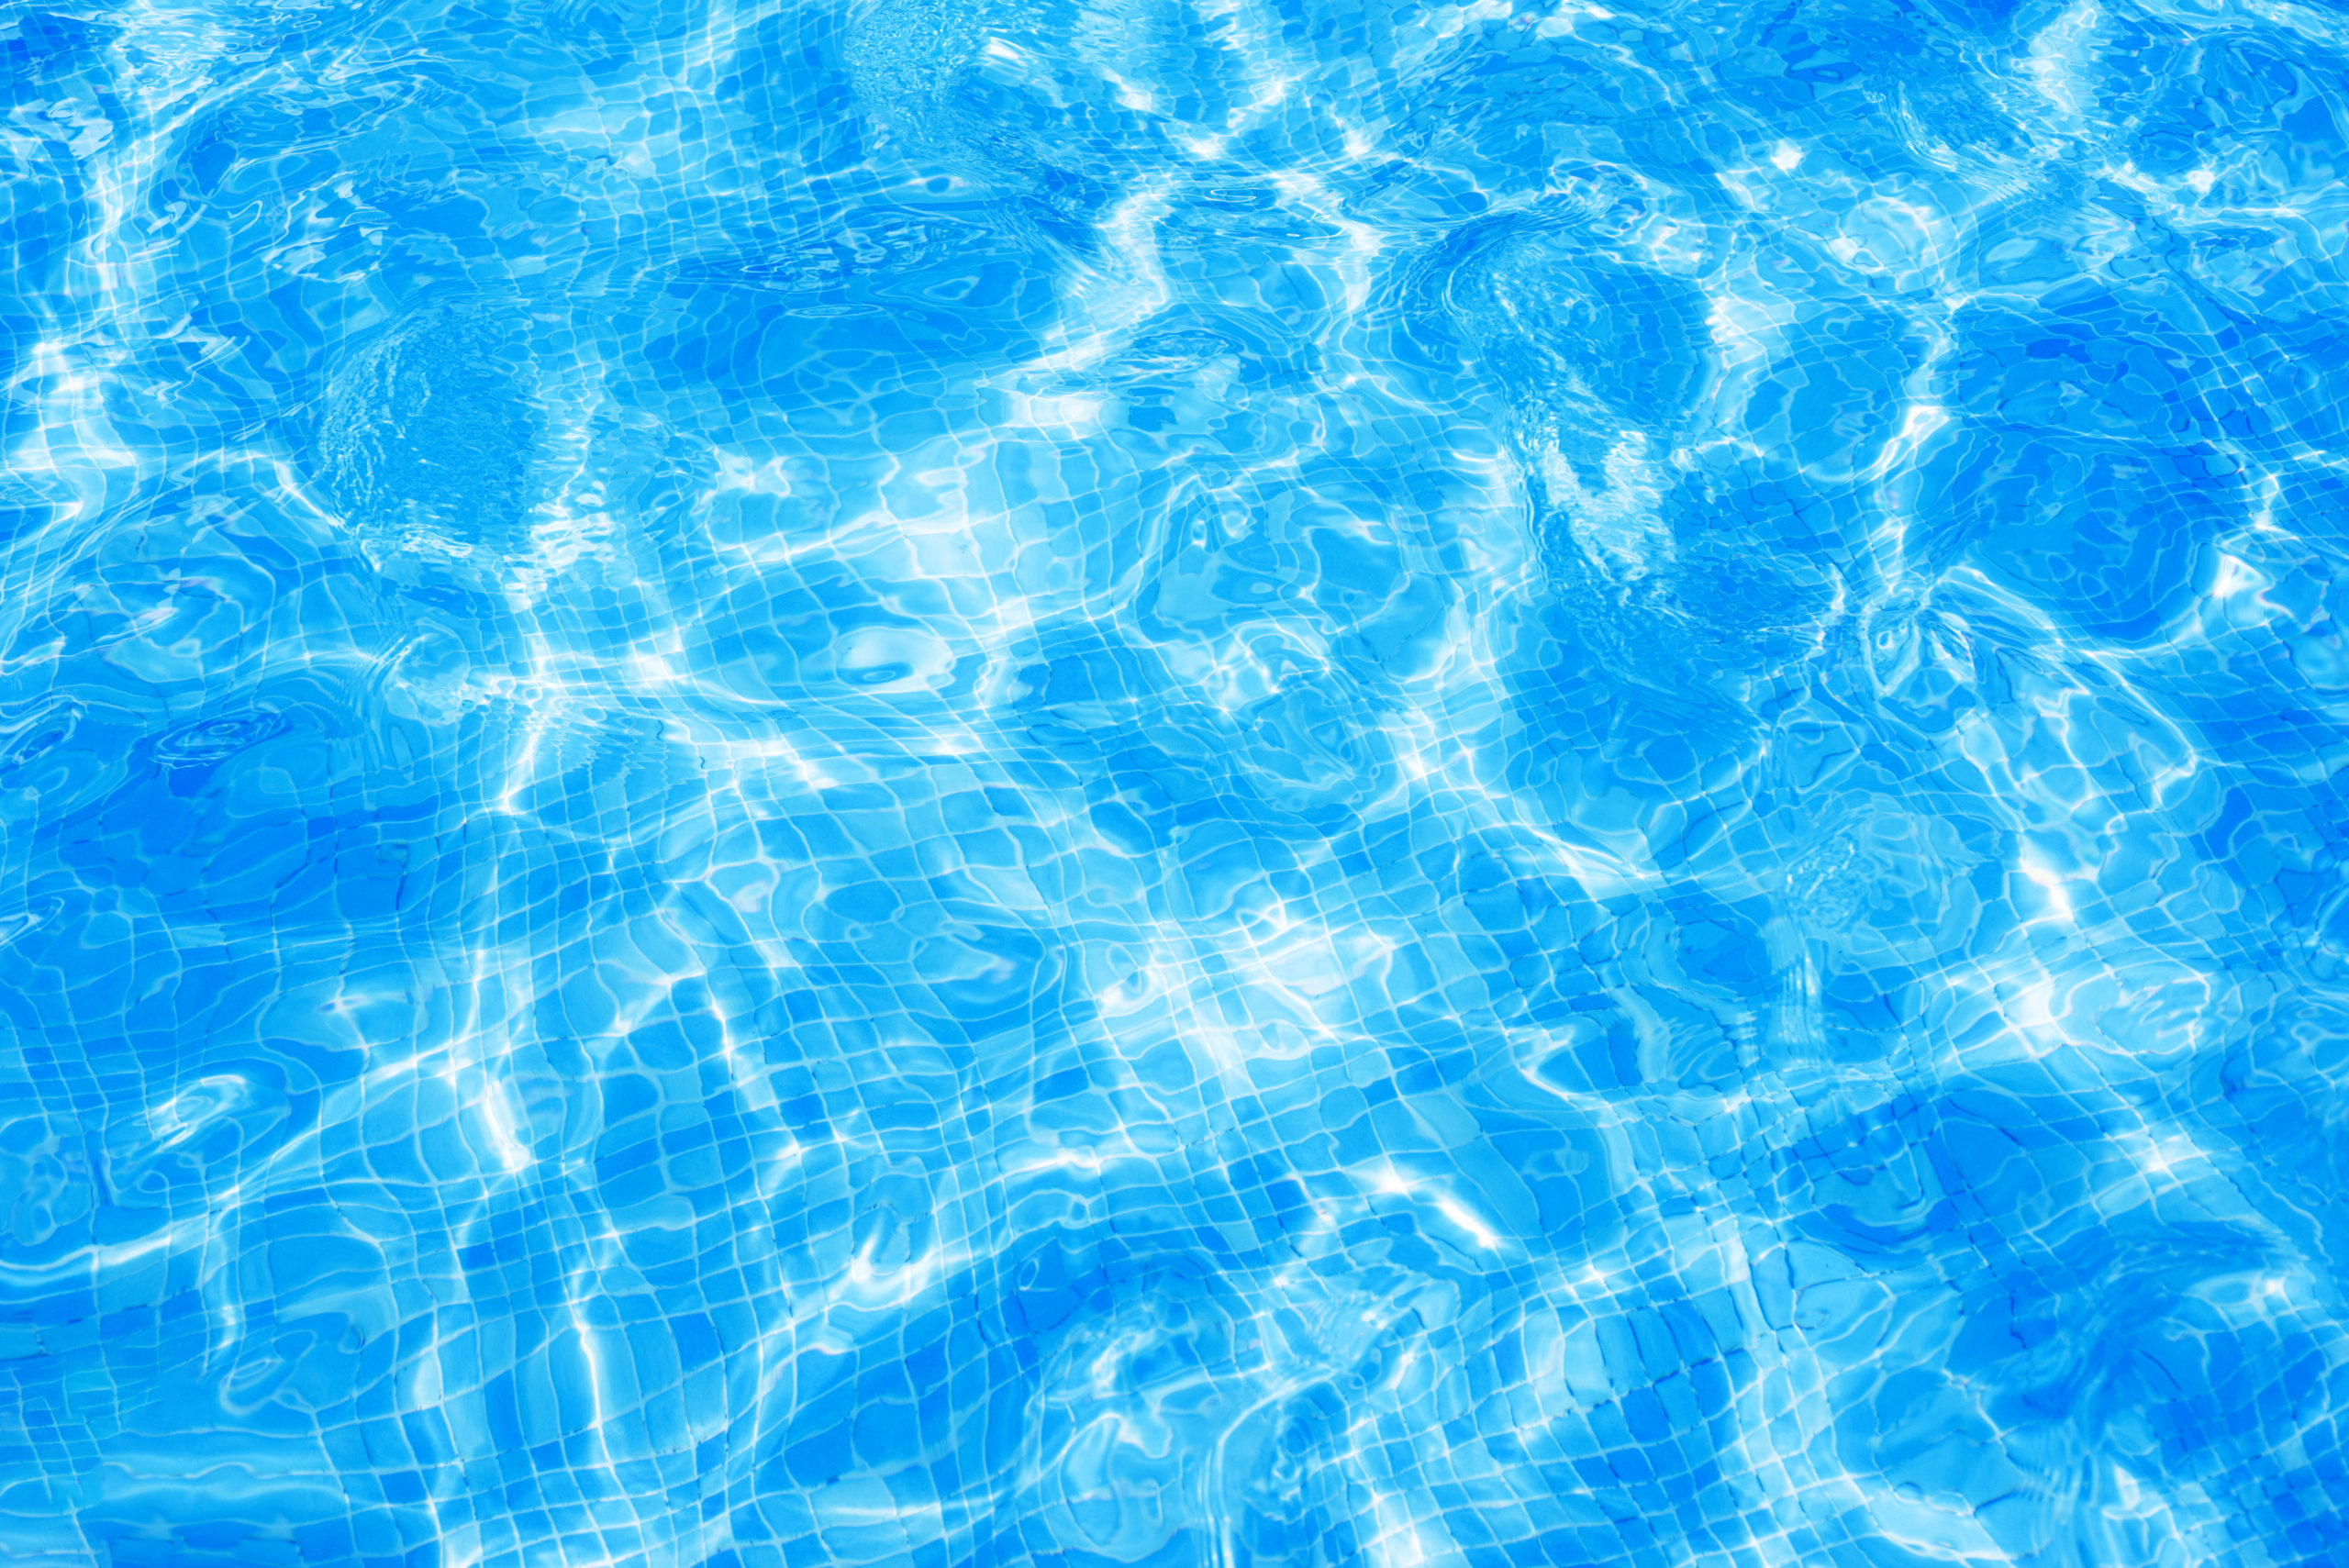 Preventing Drowning And Other Pool Dangers